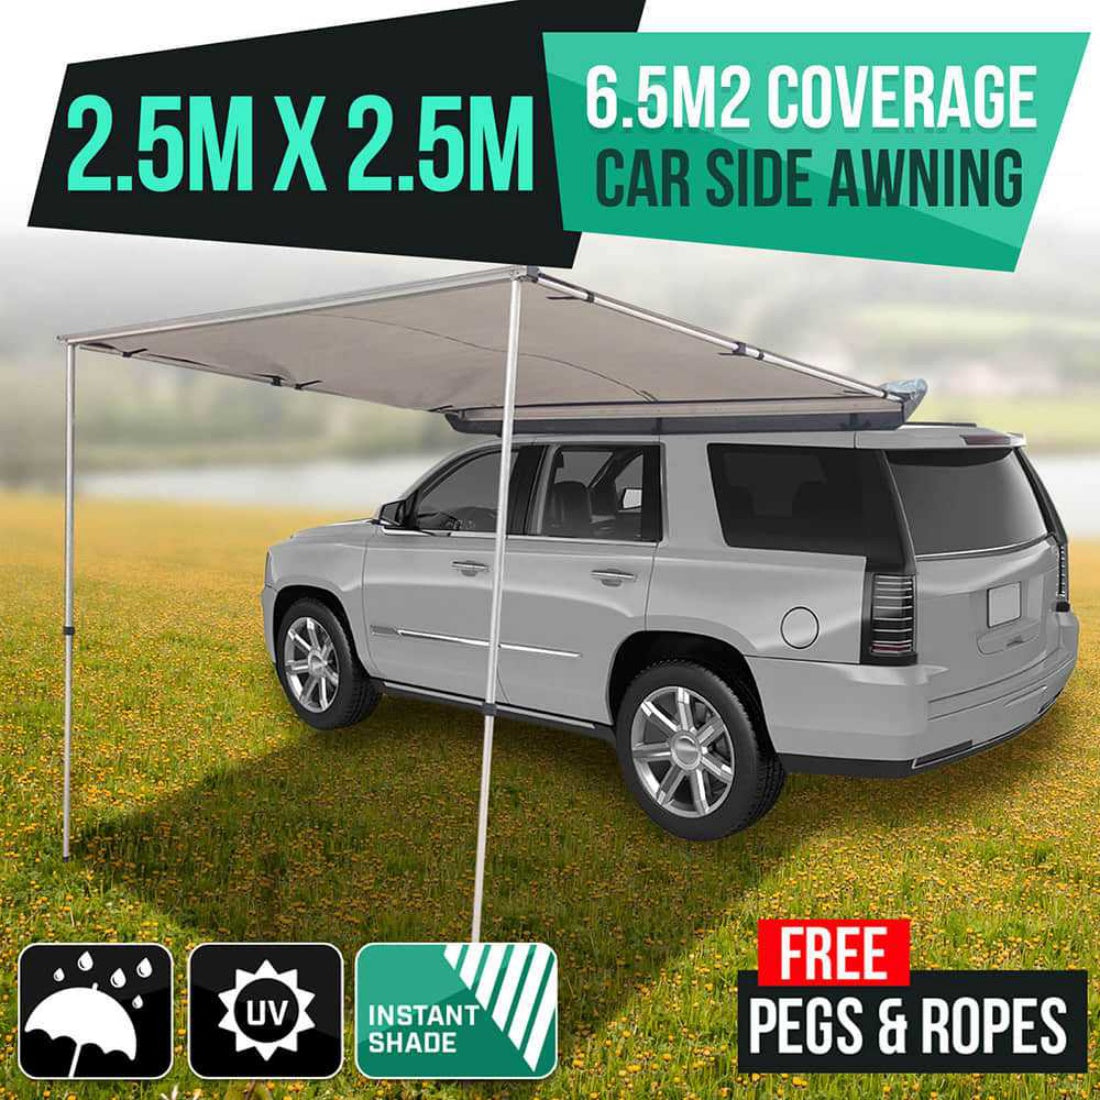 Small Side Awning (1.5m x 2.0m)